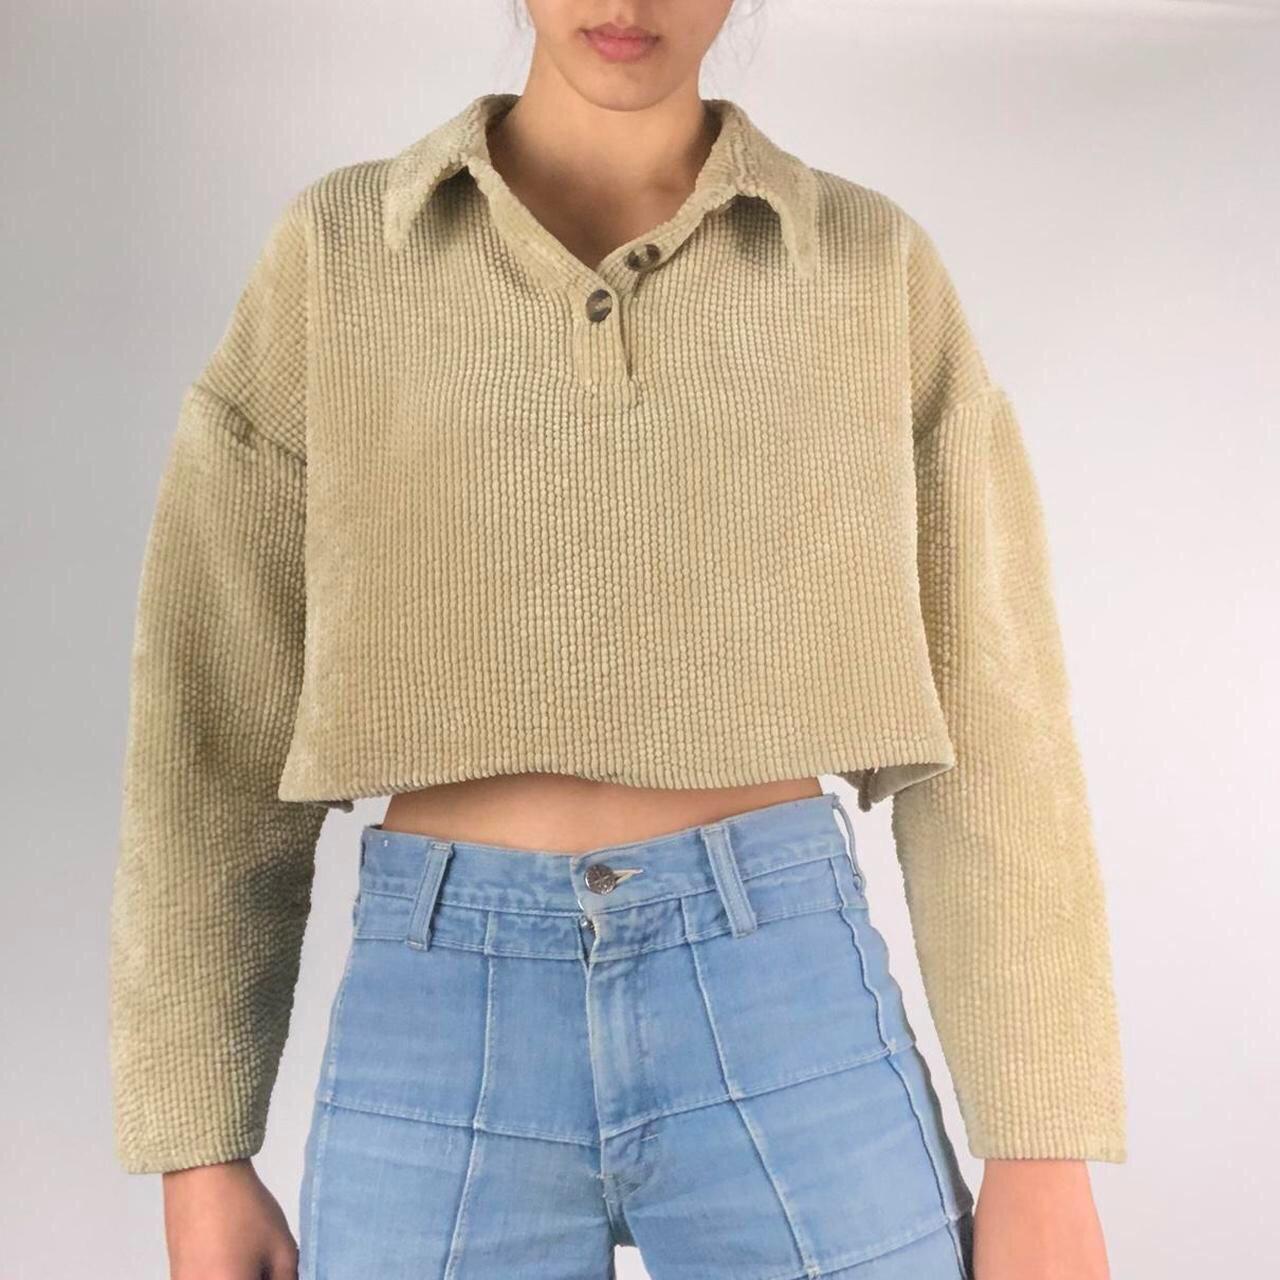 Product Image 3 - Tan cropped long sleeve sweater